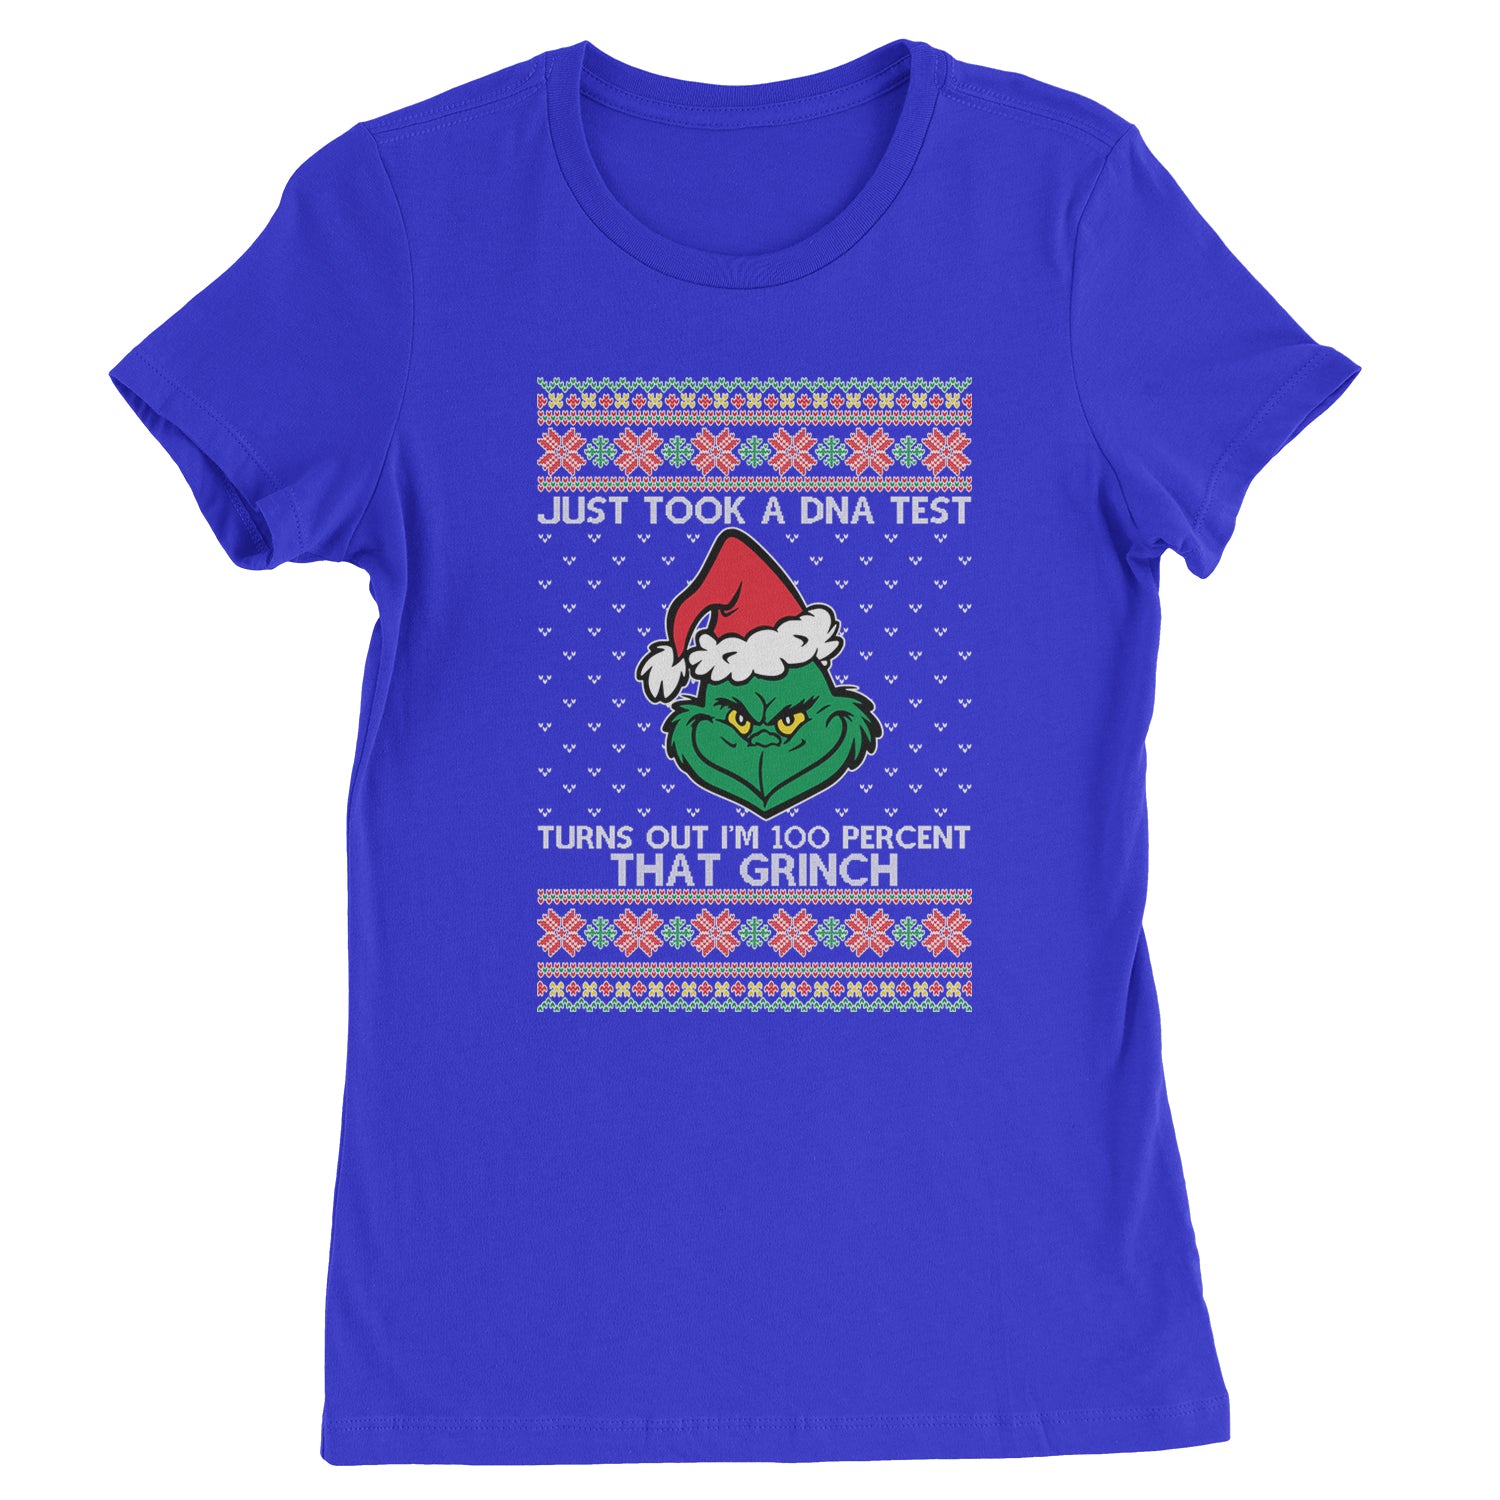 One Hundred Percent That Grinch Womens T-shirt christmas, grinch, sweater, sweatshirt, ugly, xmas by Expression Tees